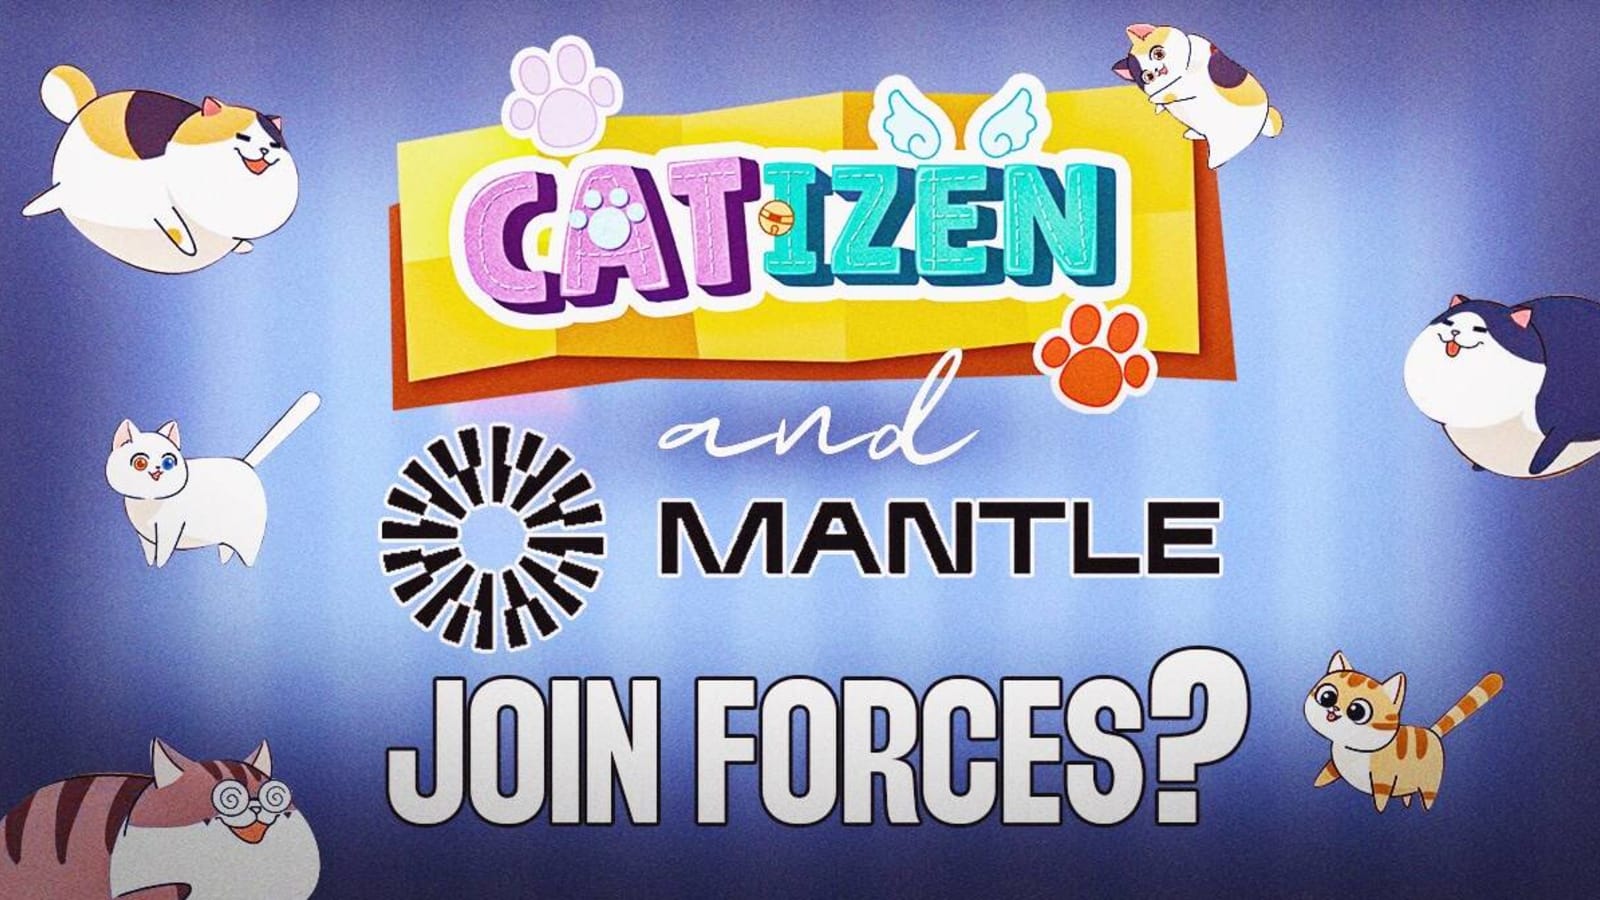 Mantle and Catizen Collabs